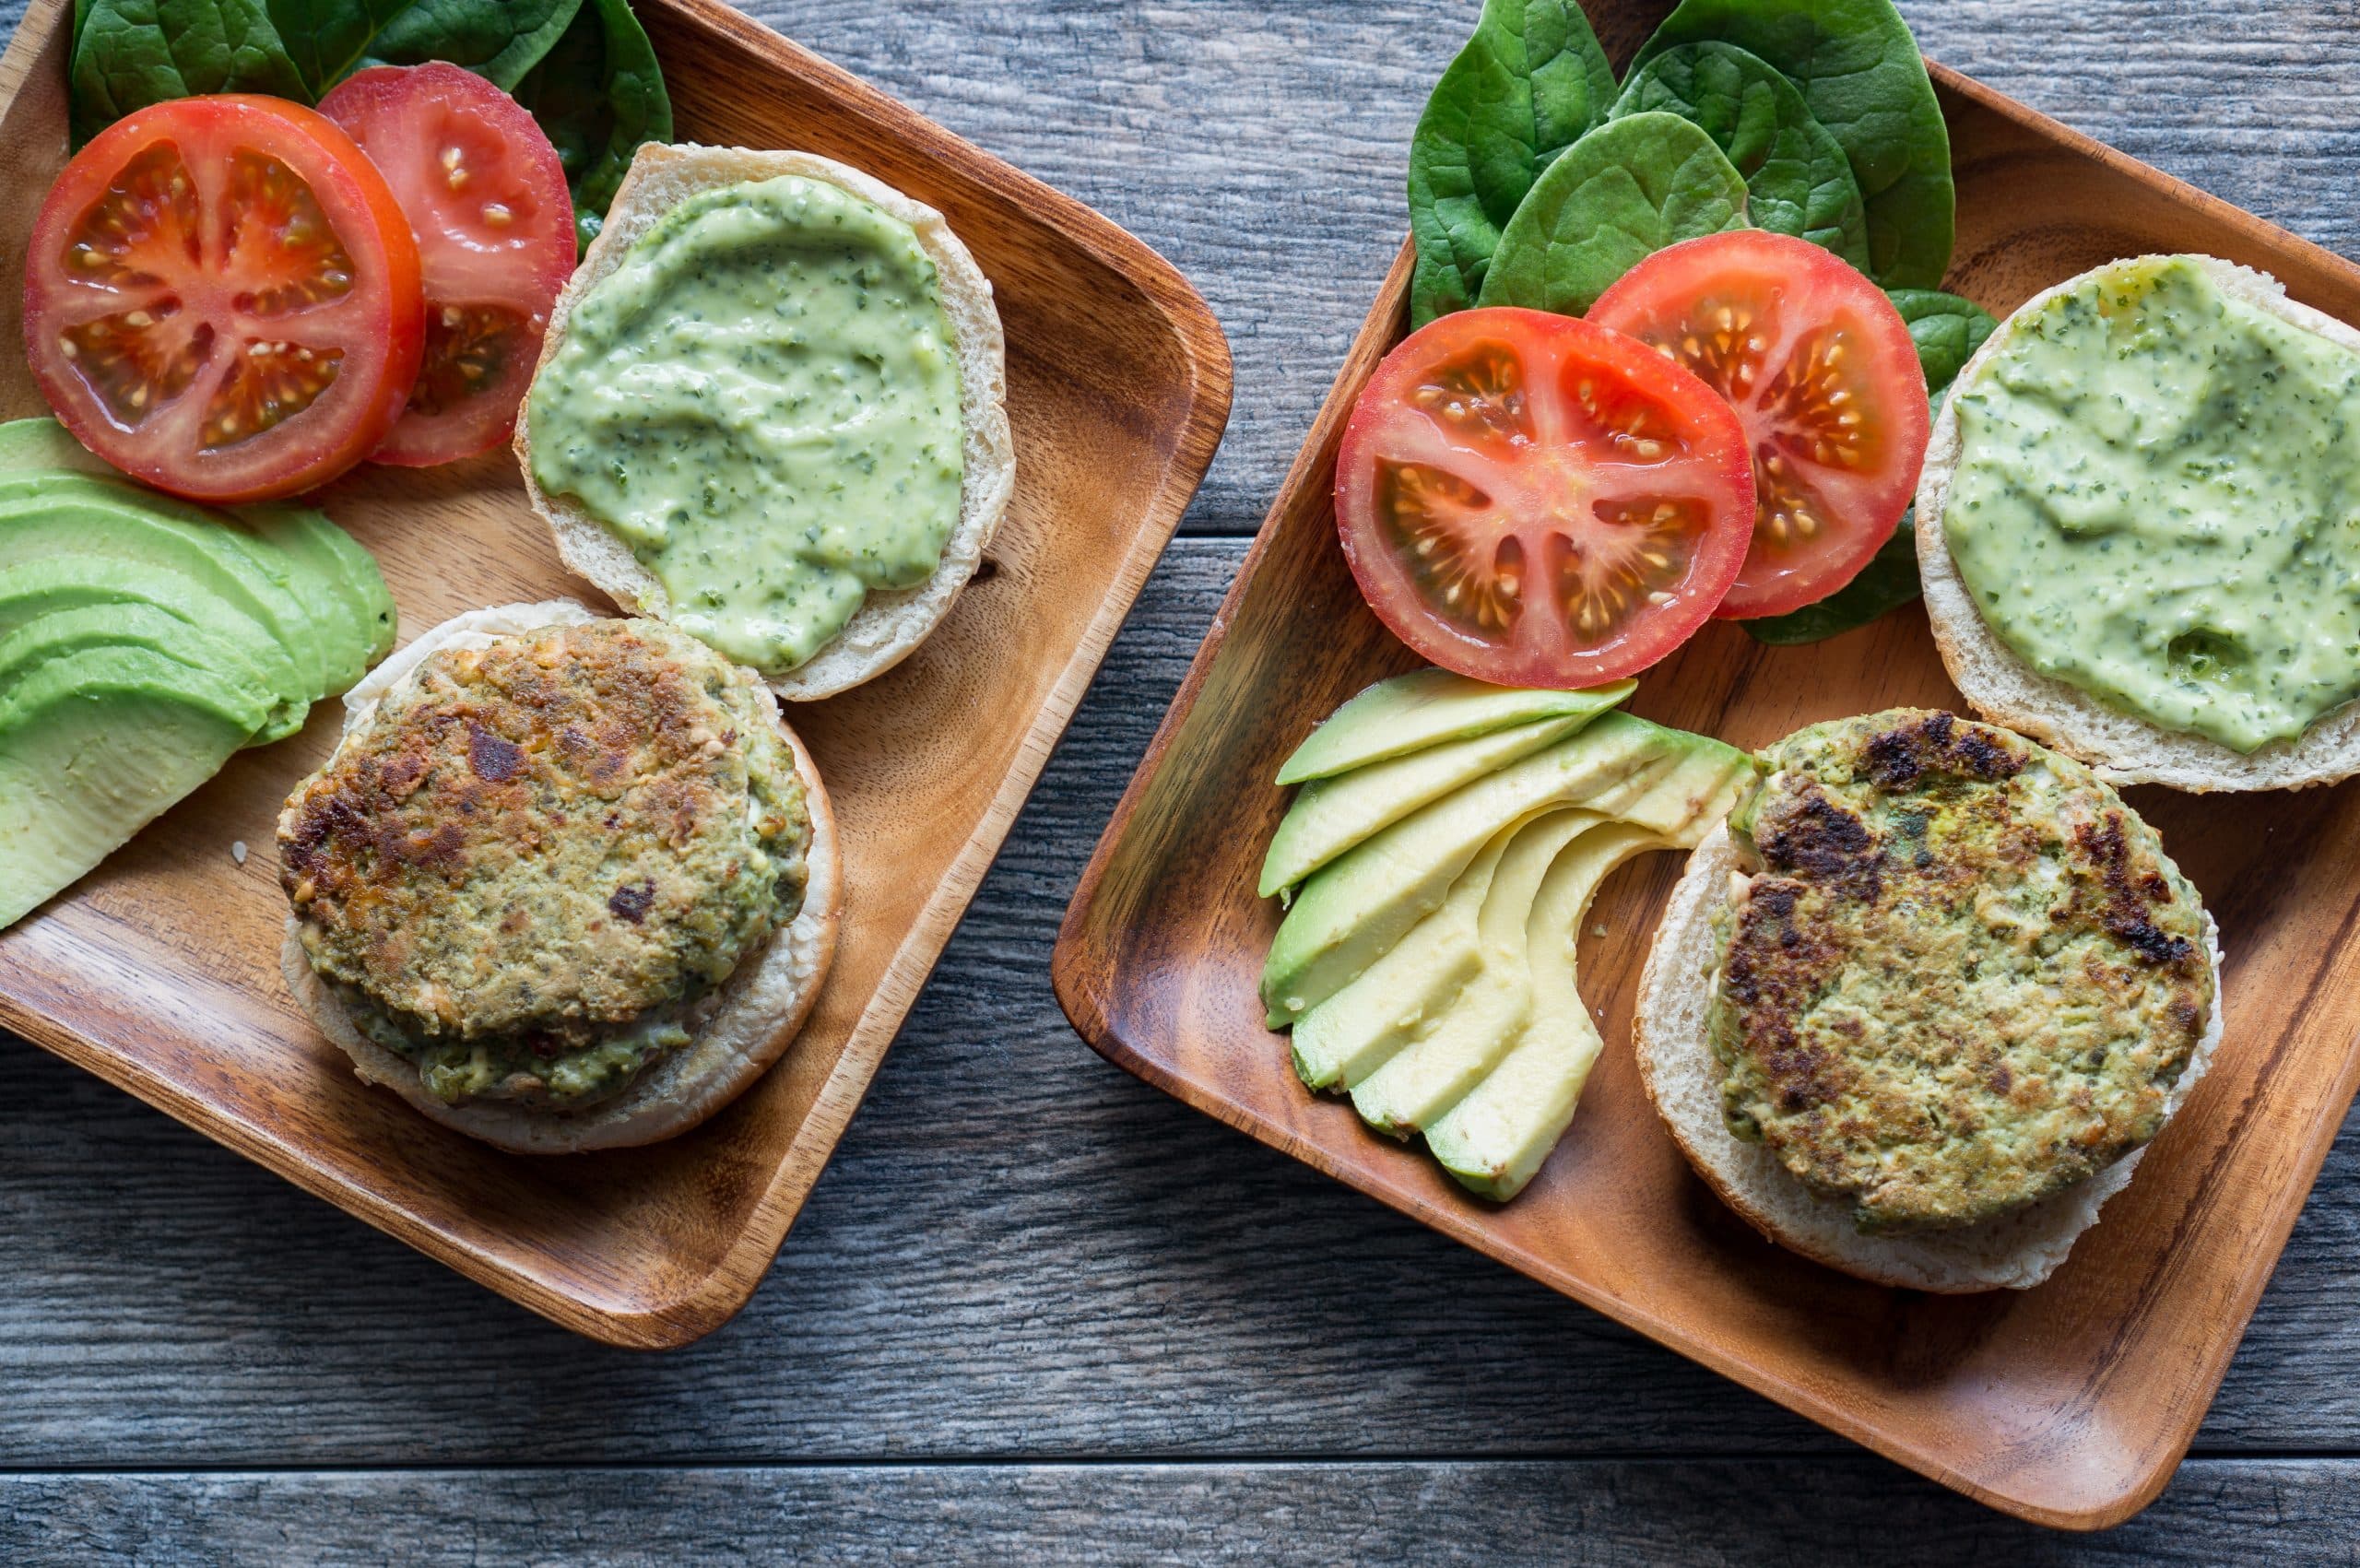 California Turkey Burgers – This healthy recipe for California Turkey Burgers with an easy pesto spread comes together in under 30 min! Enjoy on a salad, in a lettuce wrap, pita pocket, or sandwiched between sesame buns. These gluten-free patties use simple wholesome ingredients like lean ground turkey, basil pesto, low-fat cottage cheese, and coconut oil. We love stacking these with crisp fresh tomatoes, sliced avocado, and crispy bacon! ♥ | freeyourfork.com